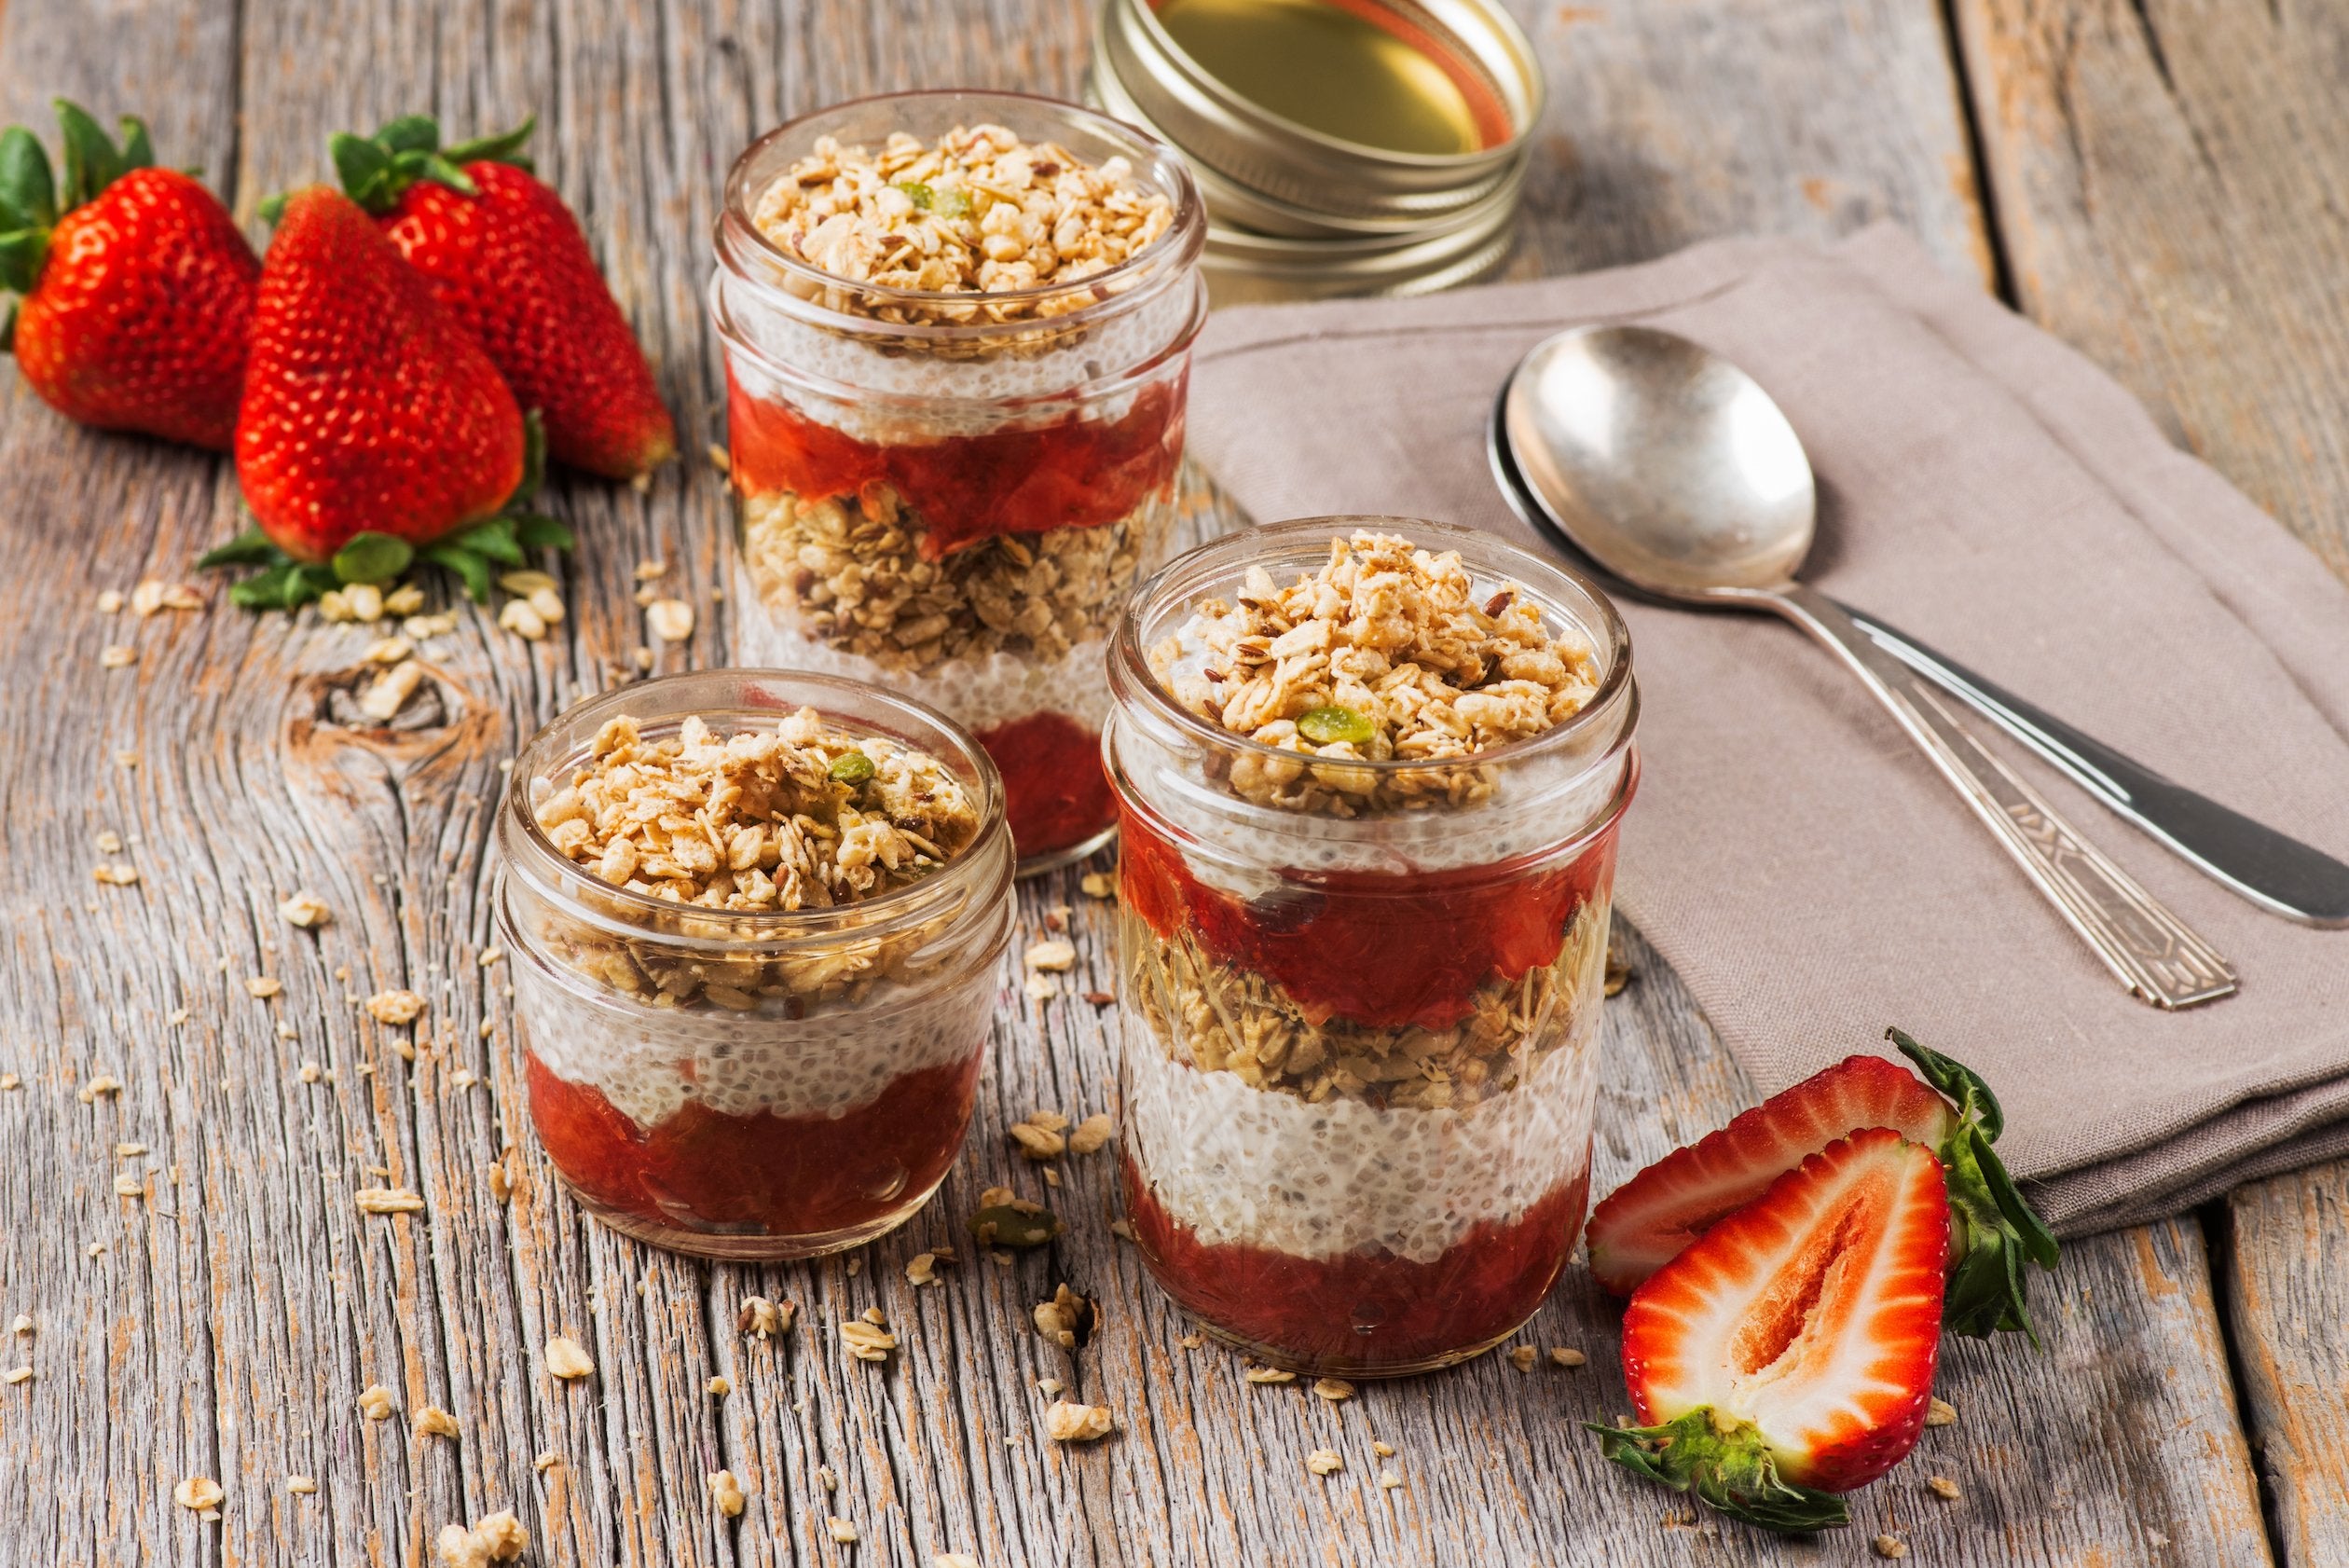 Strawberry Chia Pudding Parfait - The Hint of Rosemary